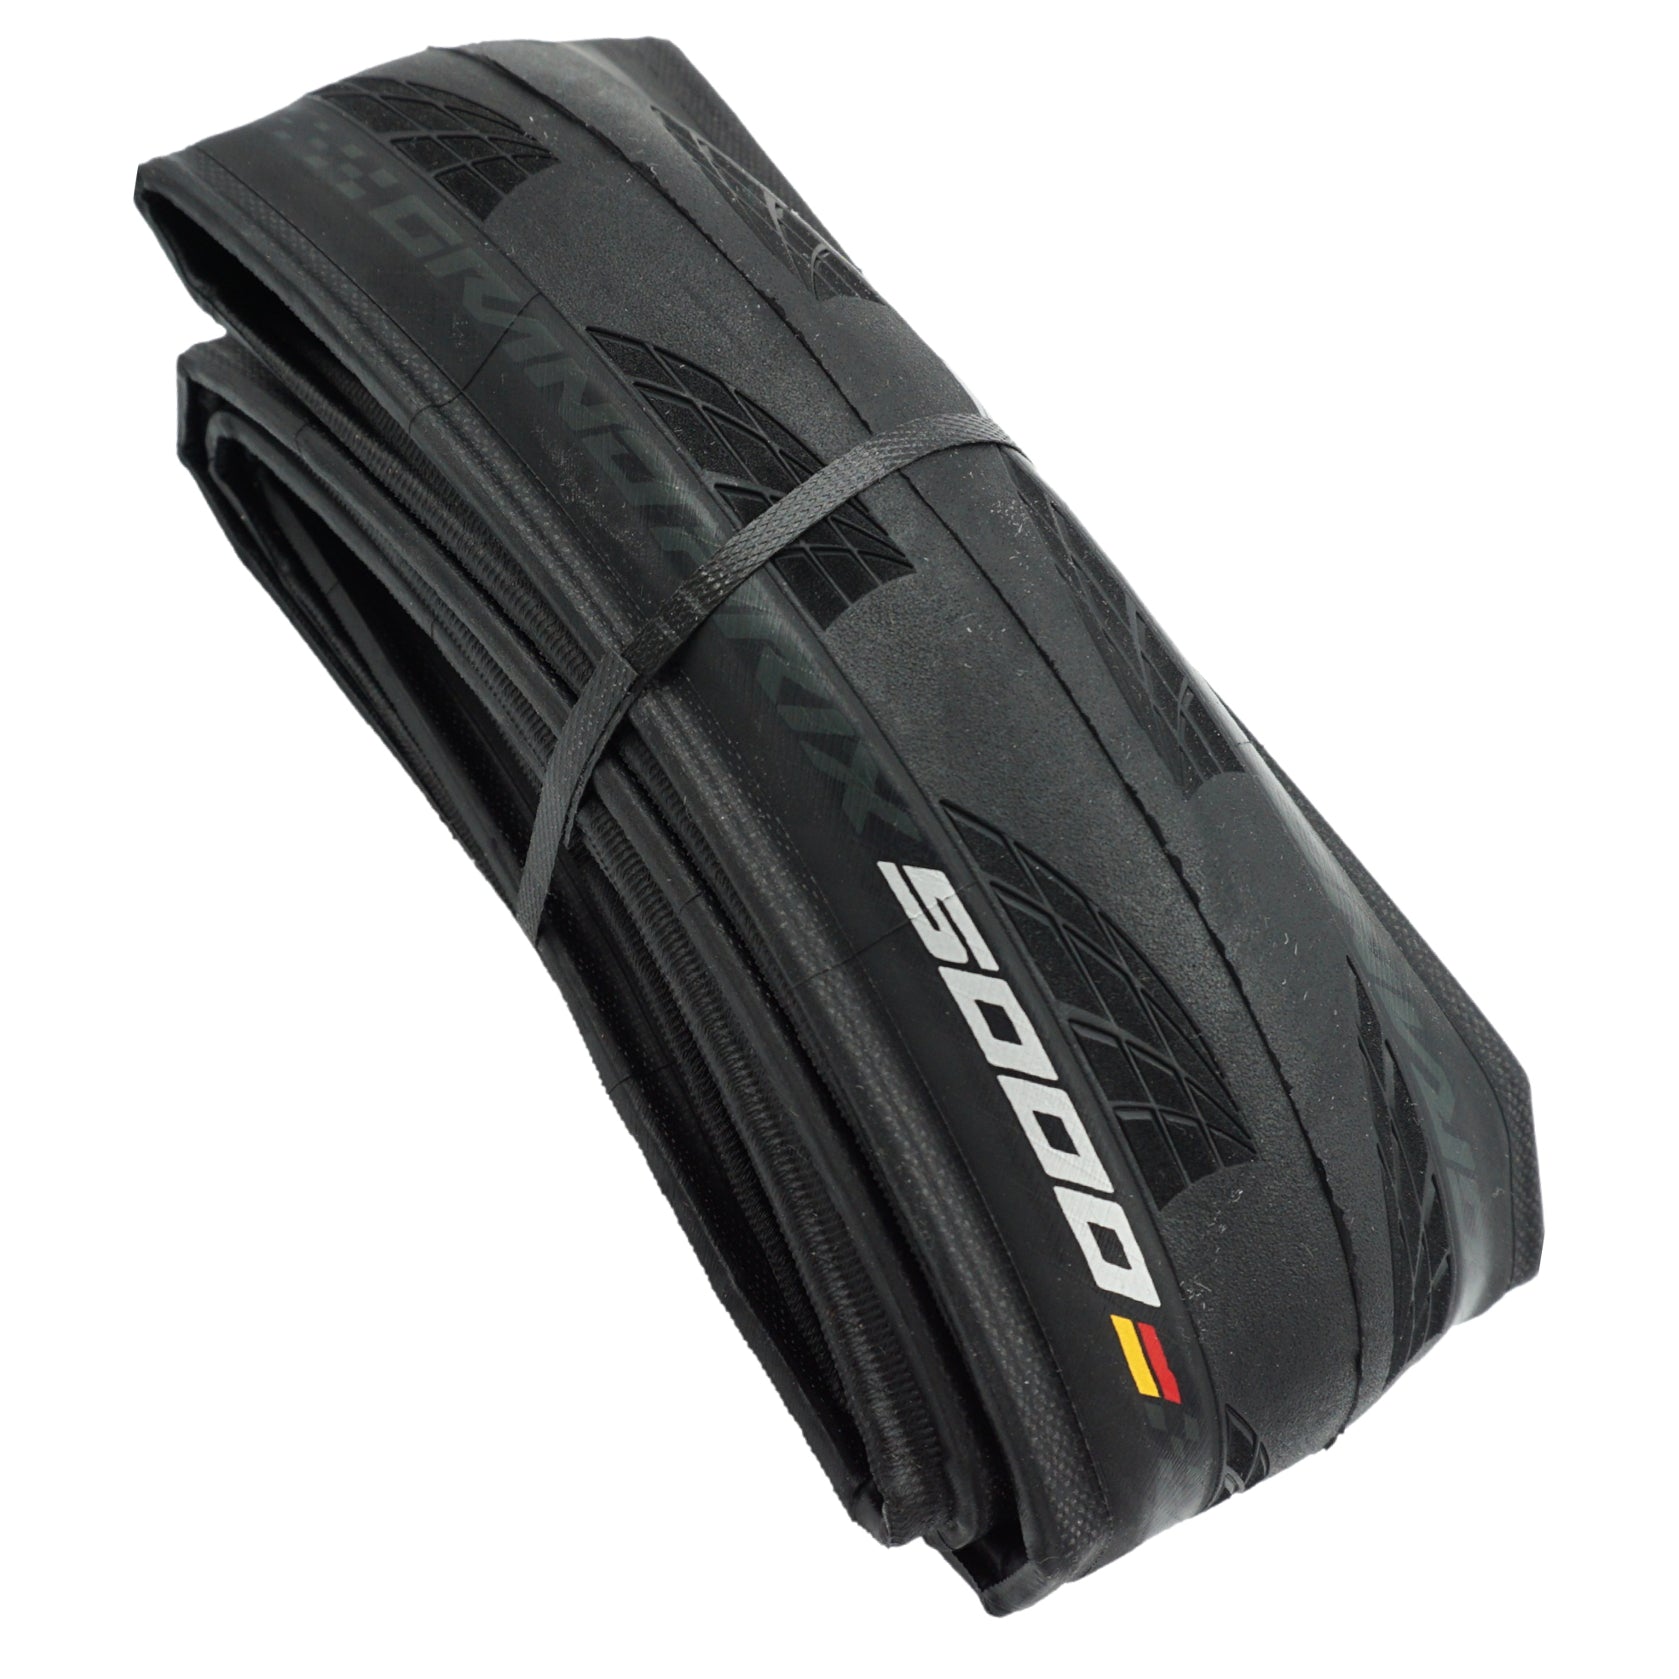 CONTINENTAL GRAND PRIX 5000 road bicycle tire 700x28, black and